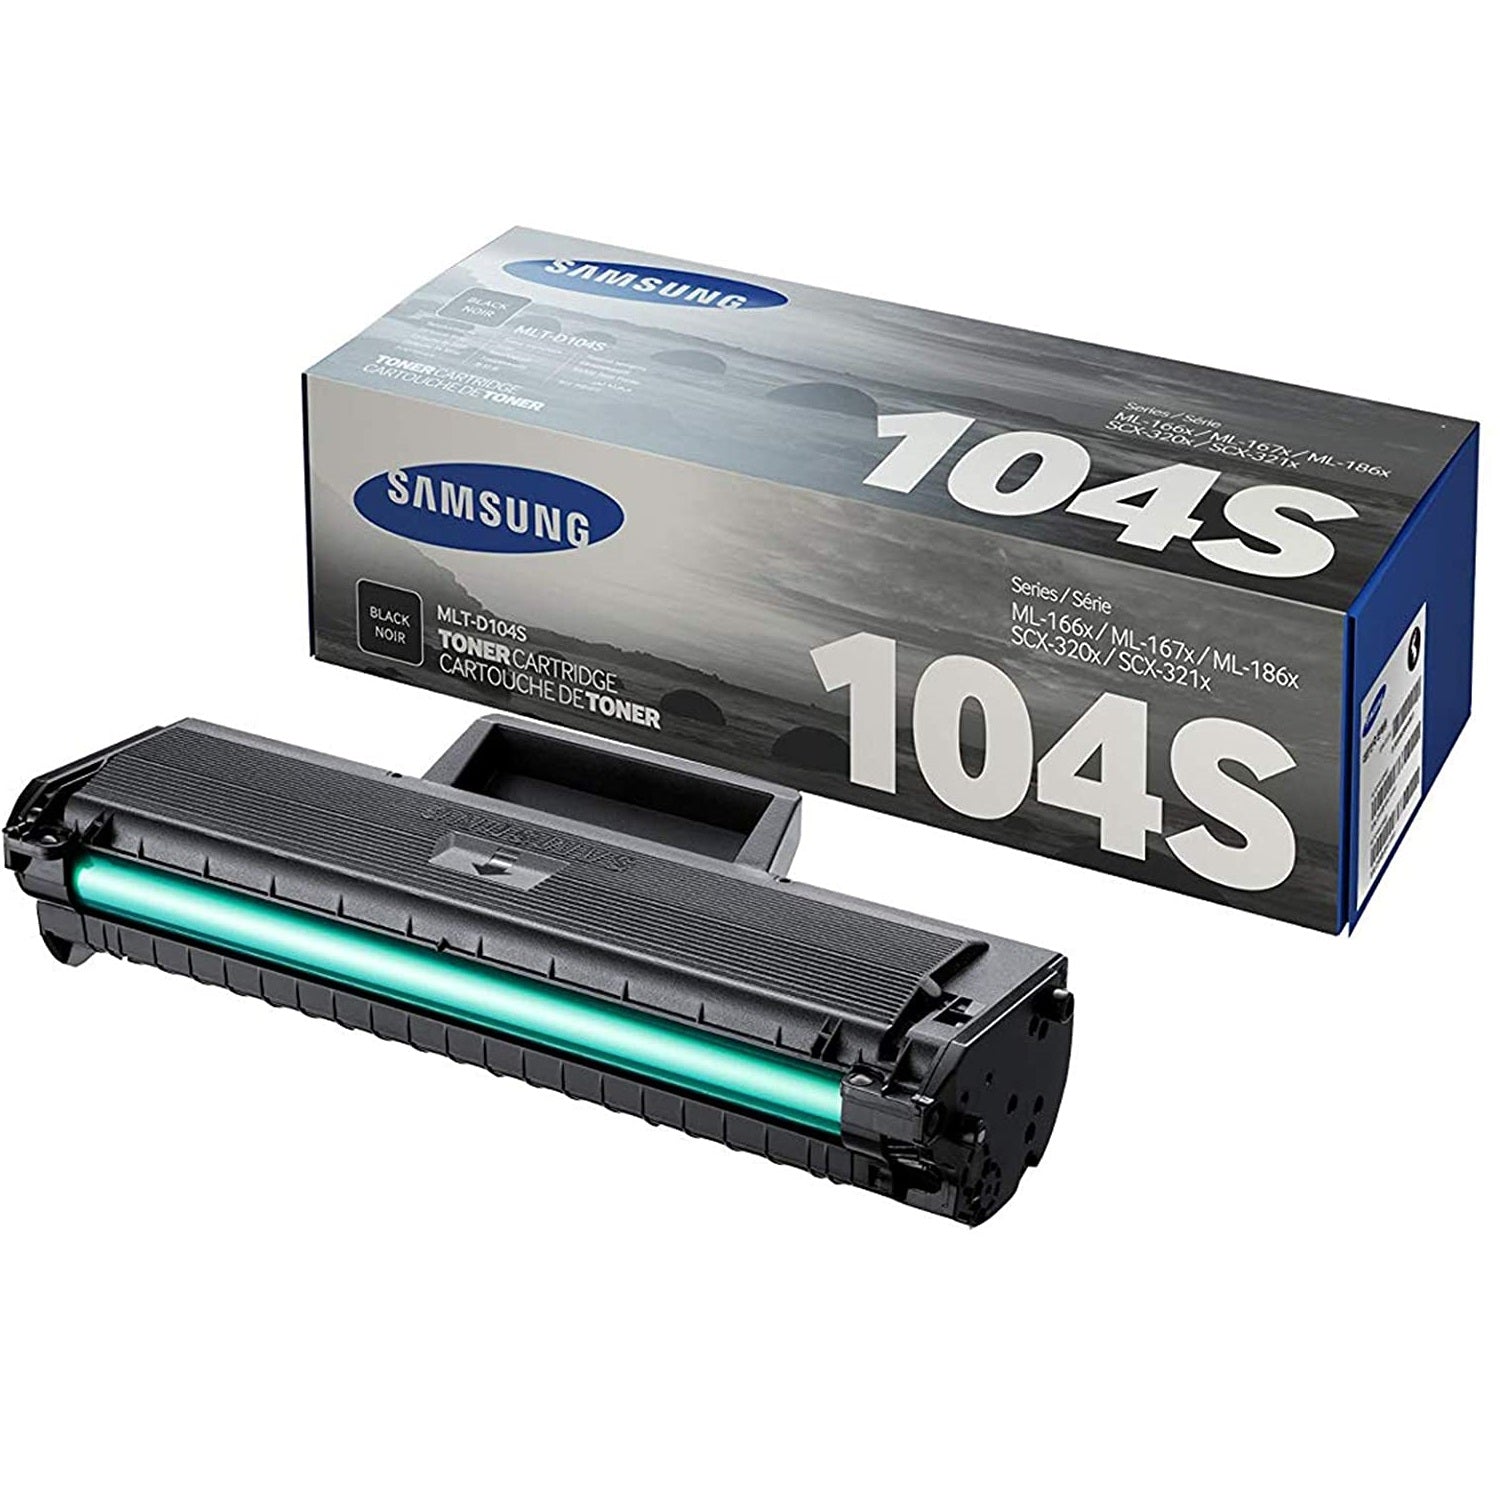 Absolute Toner Samsung Genuine MLT-D104S Black Toner Cartridge, SU750A - Yield up to 1500 pages Originial Samsung Cartridges